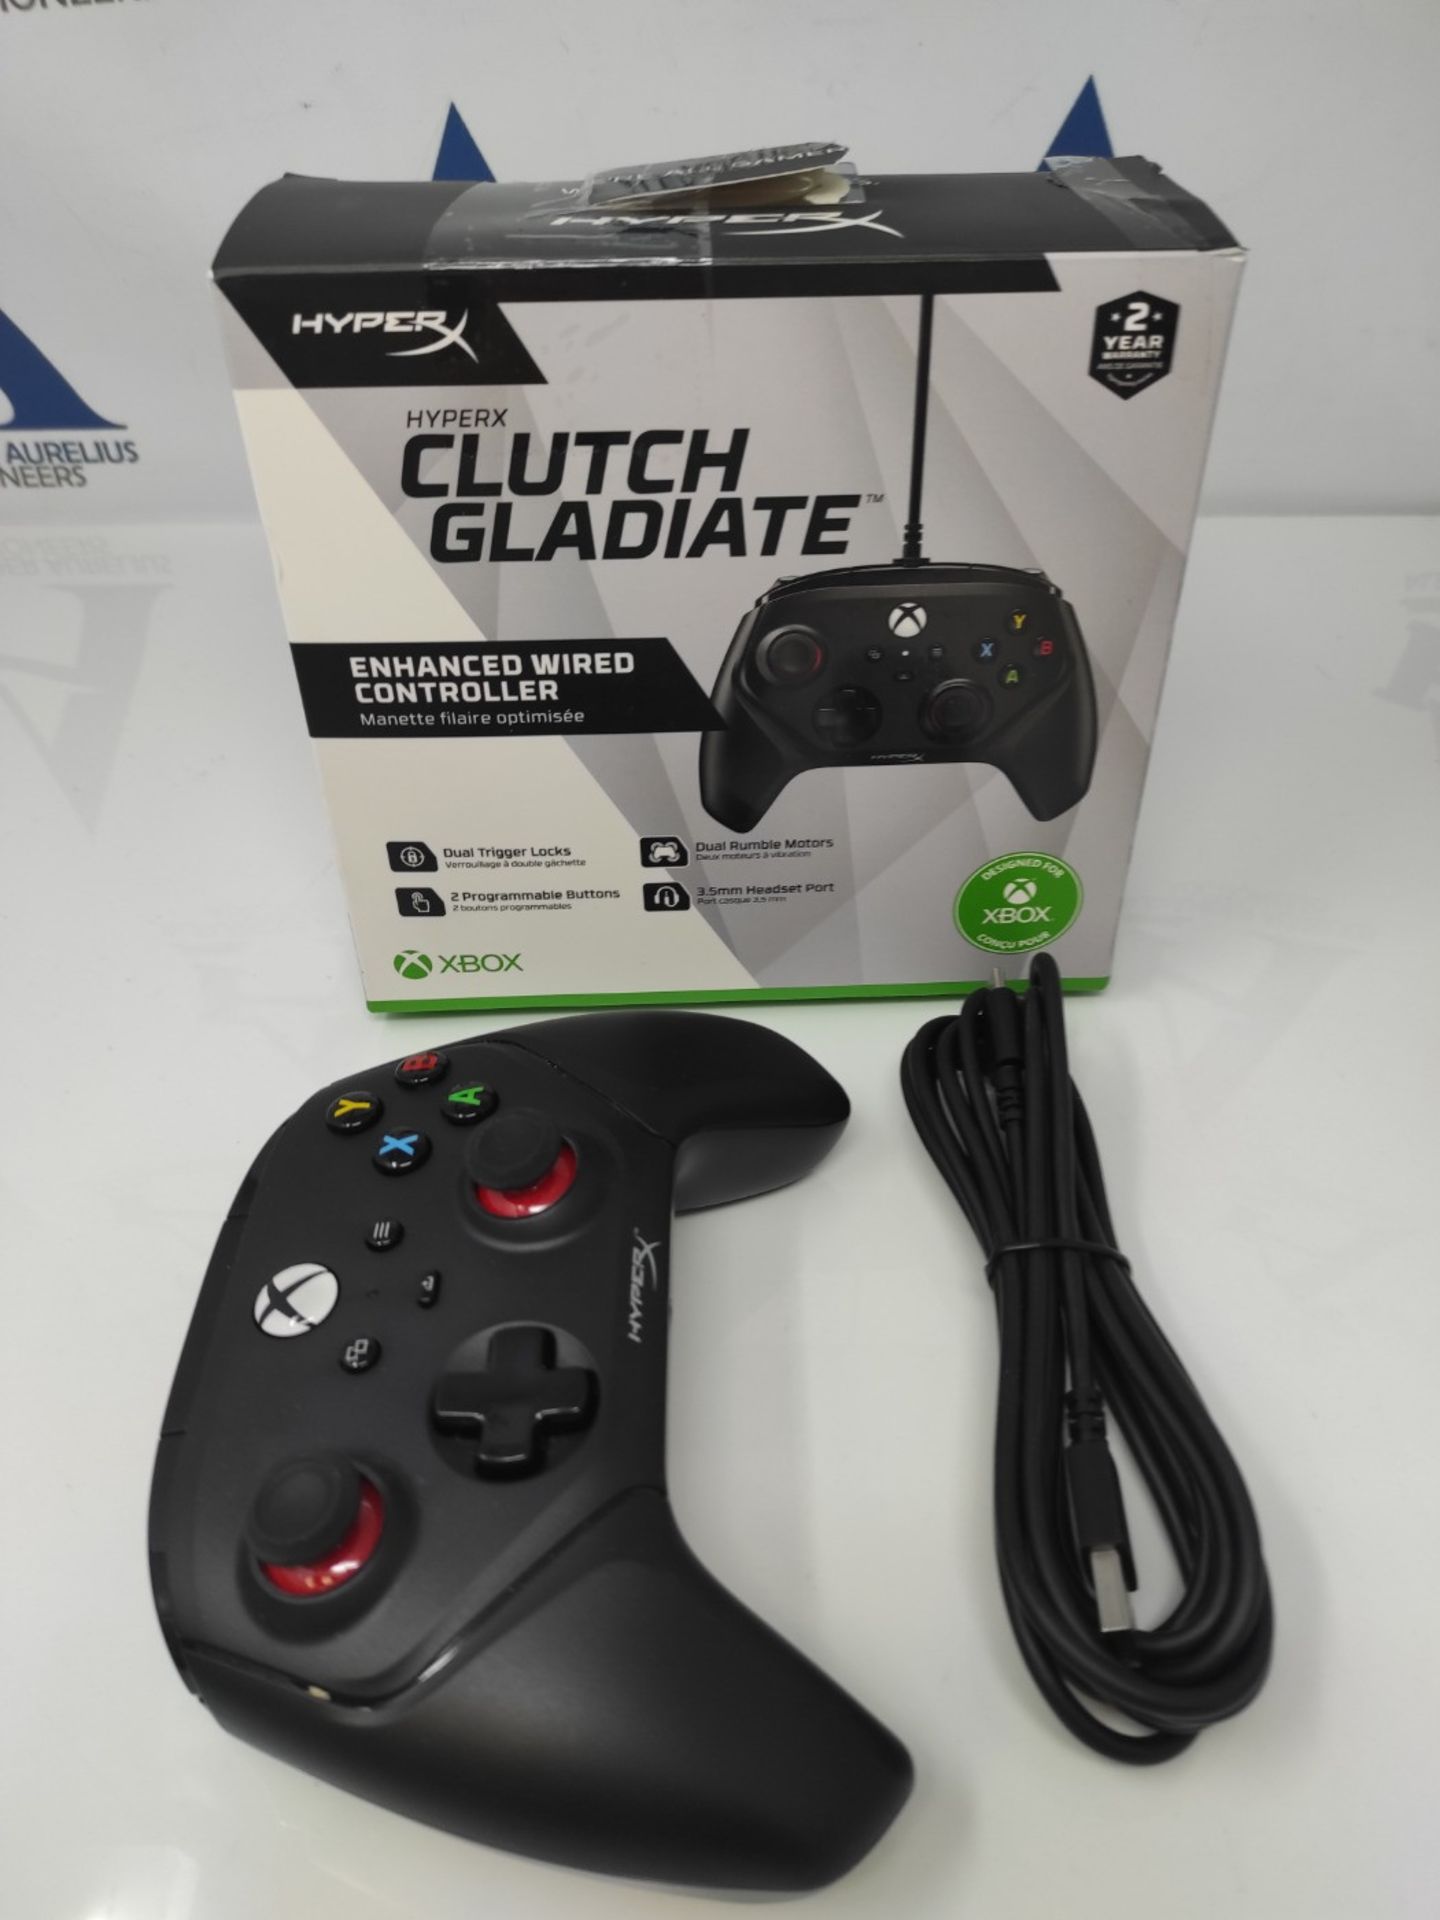 HyperX Clutch Gladiate - Wired Controller, Officially Licensed by Xbox, Dual Trigger L - Image 2 of 2